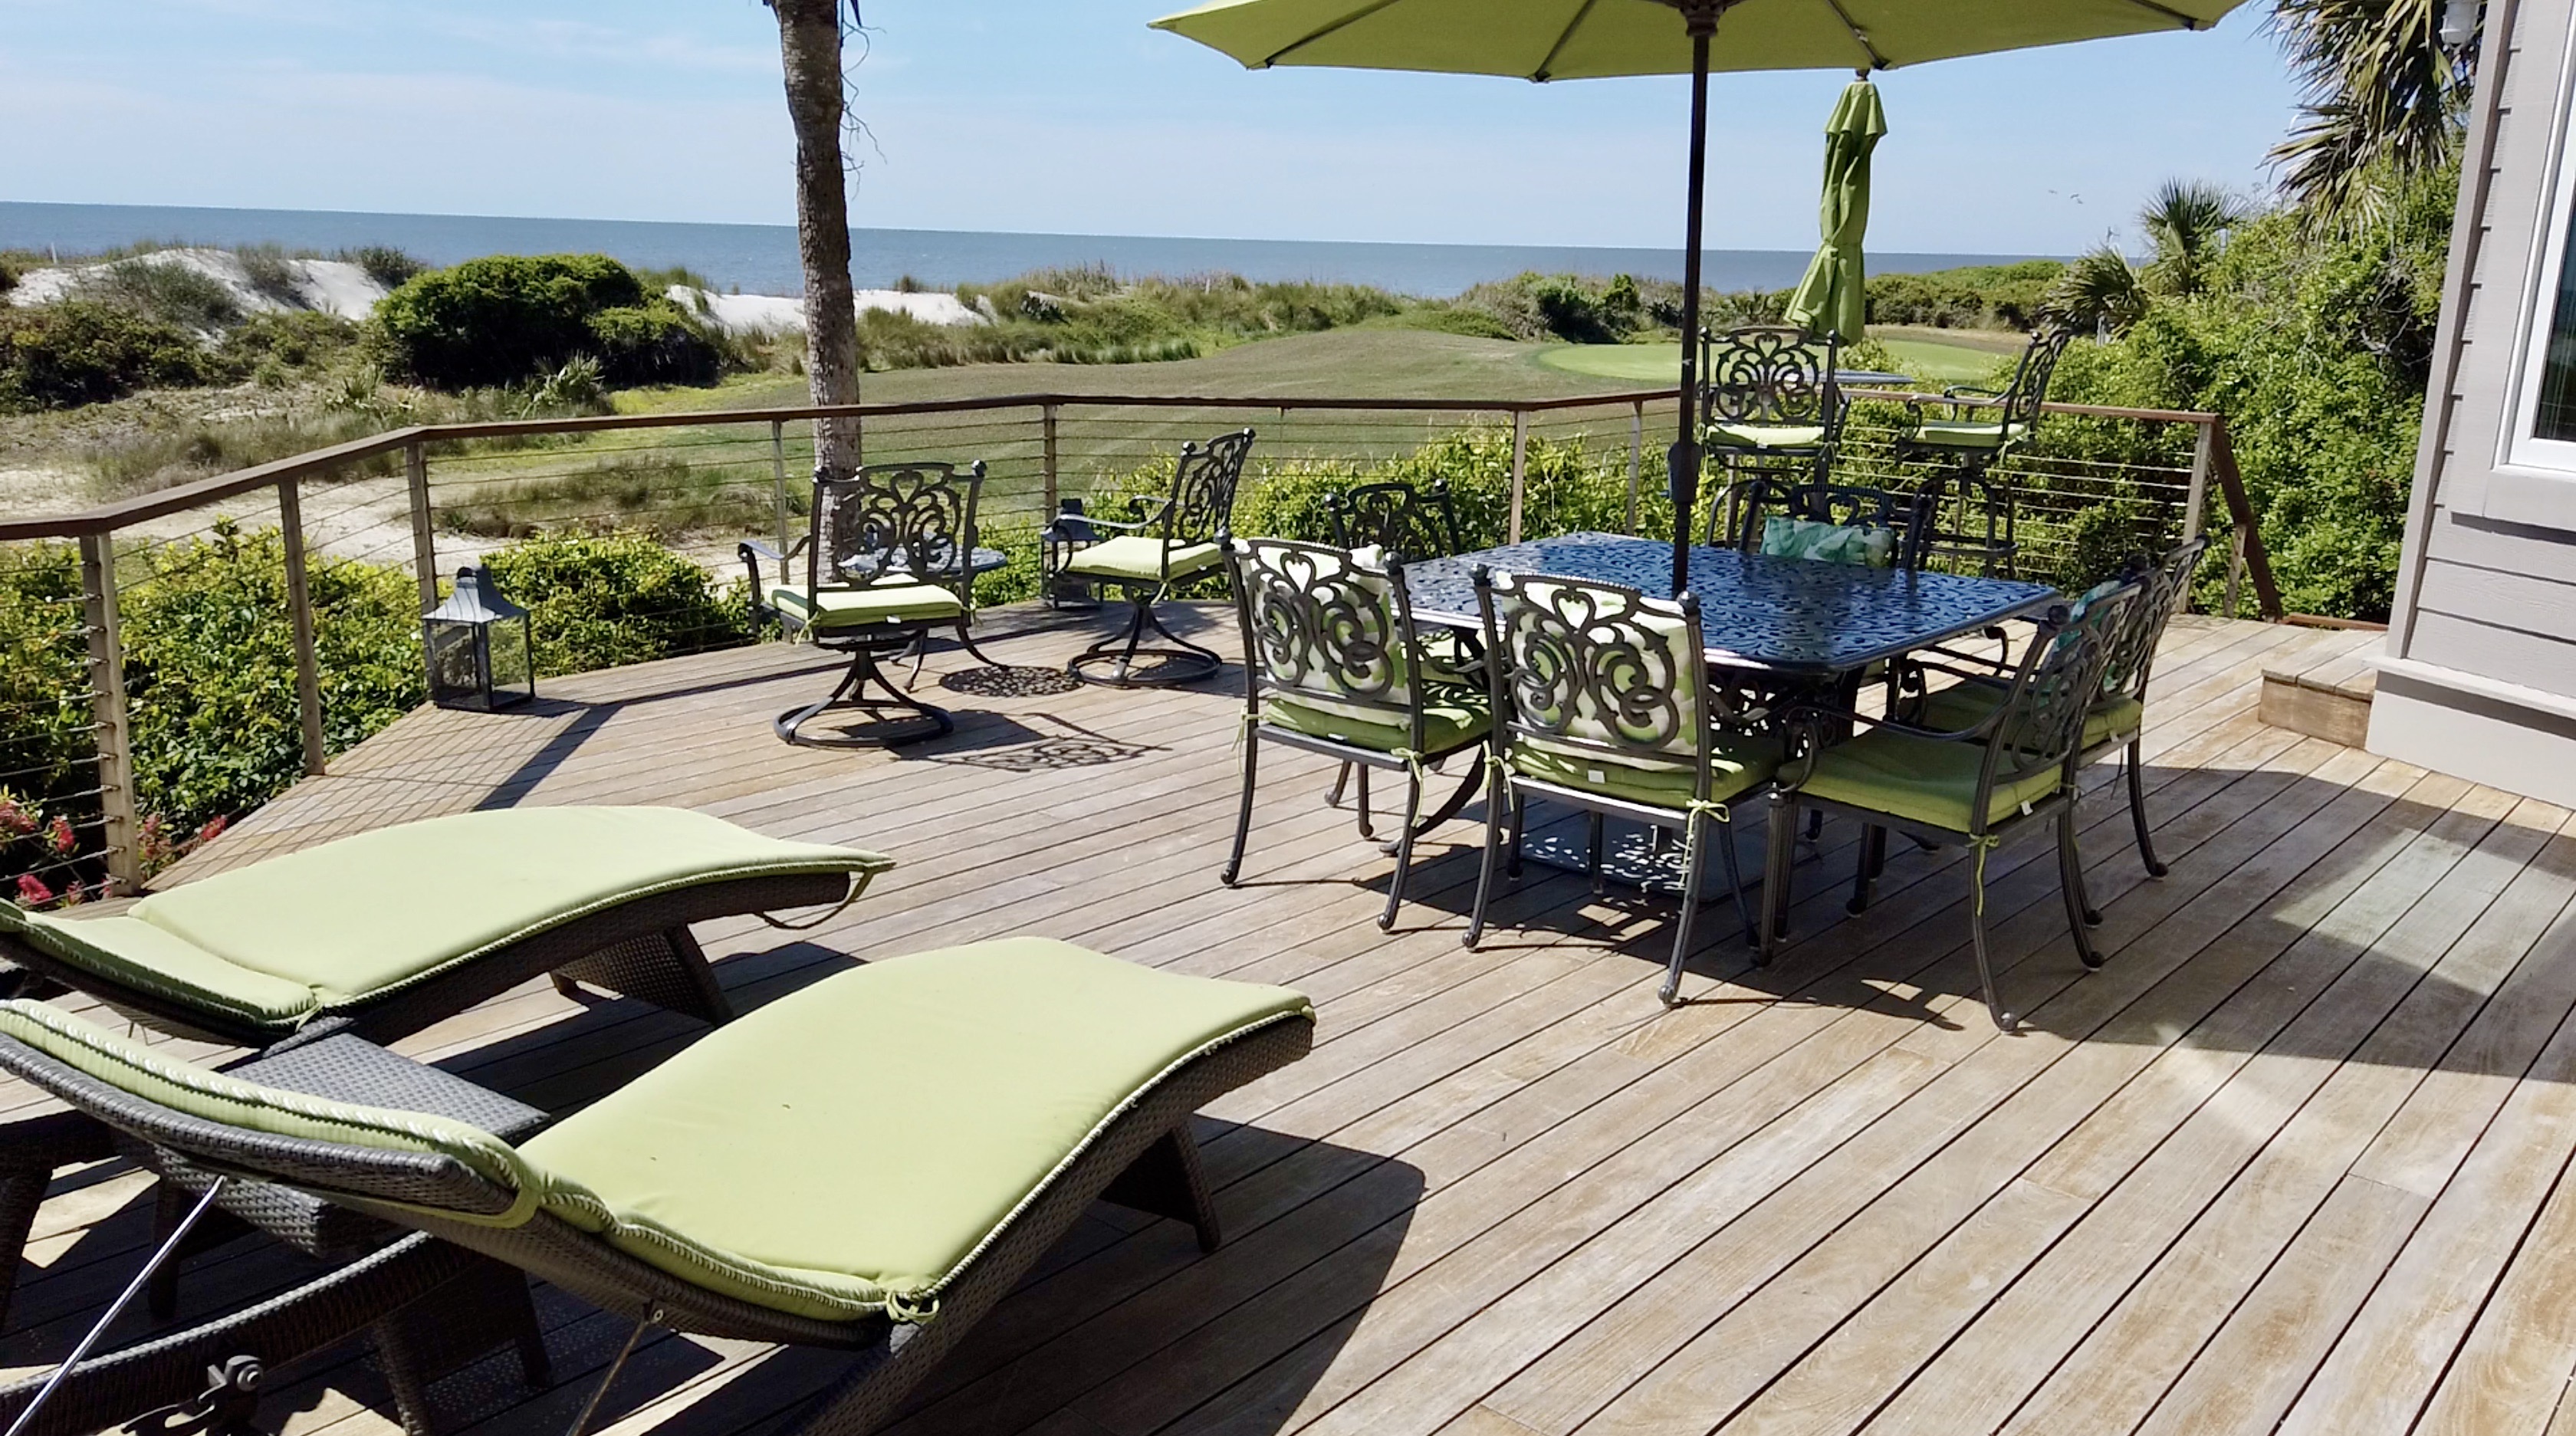 4 Bedroom Beachfront Home Houses For Rent In Kiawah Island South